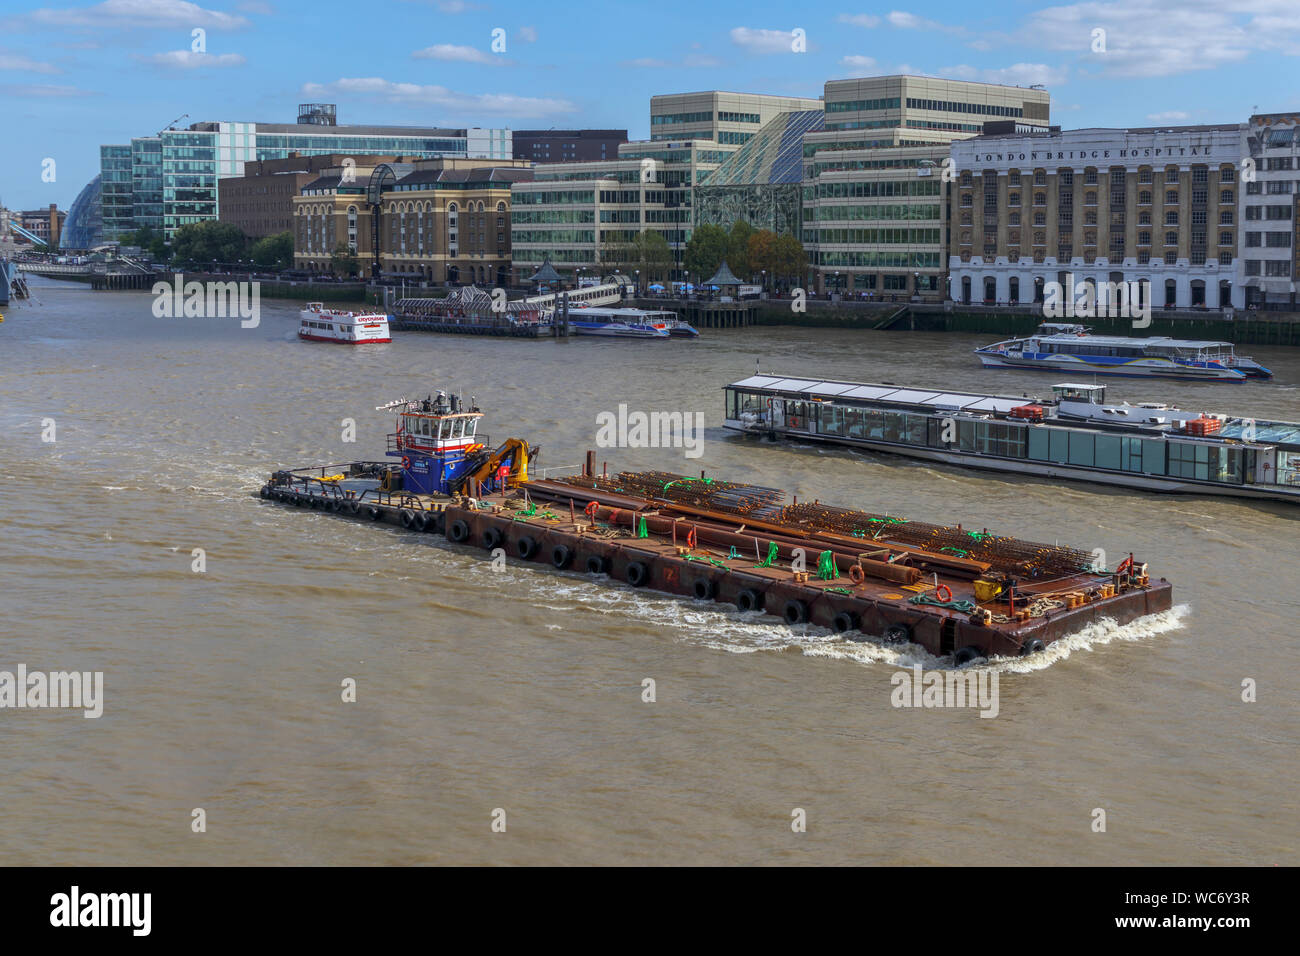 A large Multi-cat type workboat, MPV Shake Dog, delivers construction materials in the Pool of London, River Thames by Hays Galleria and London Bridge Stock Photo